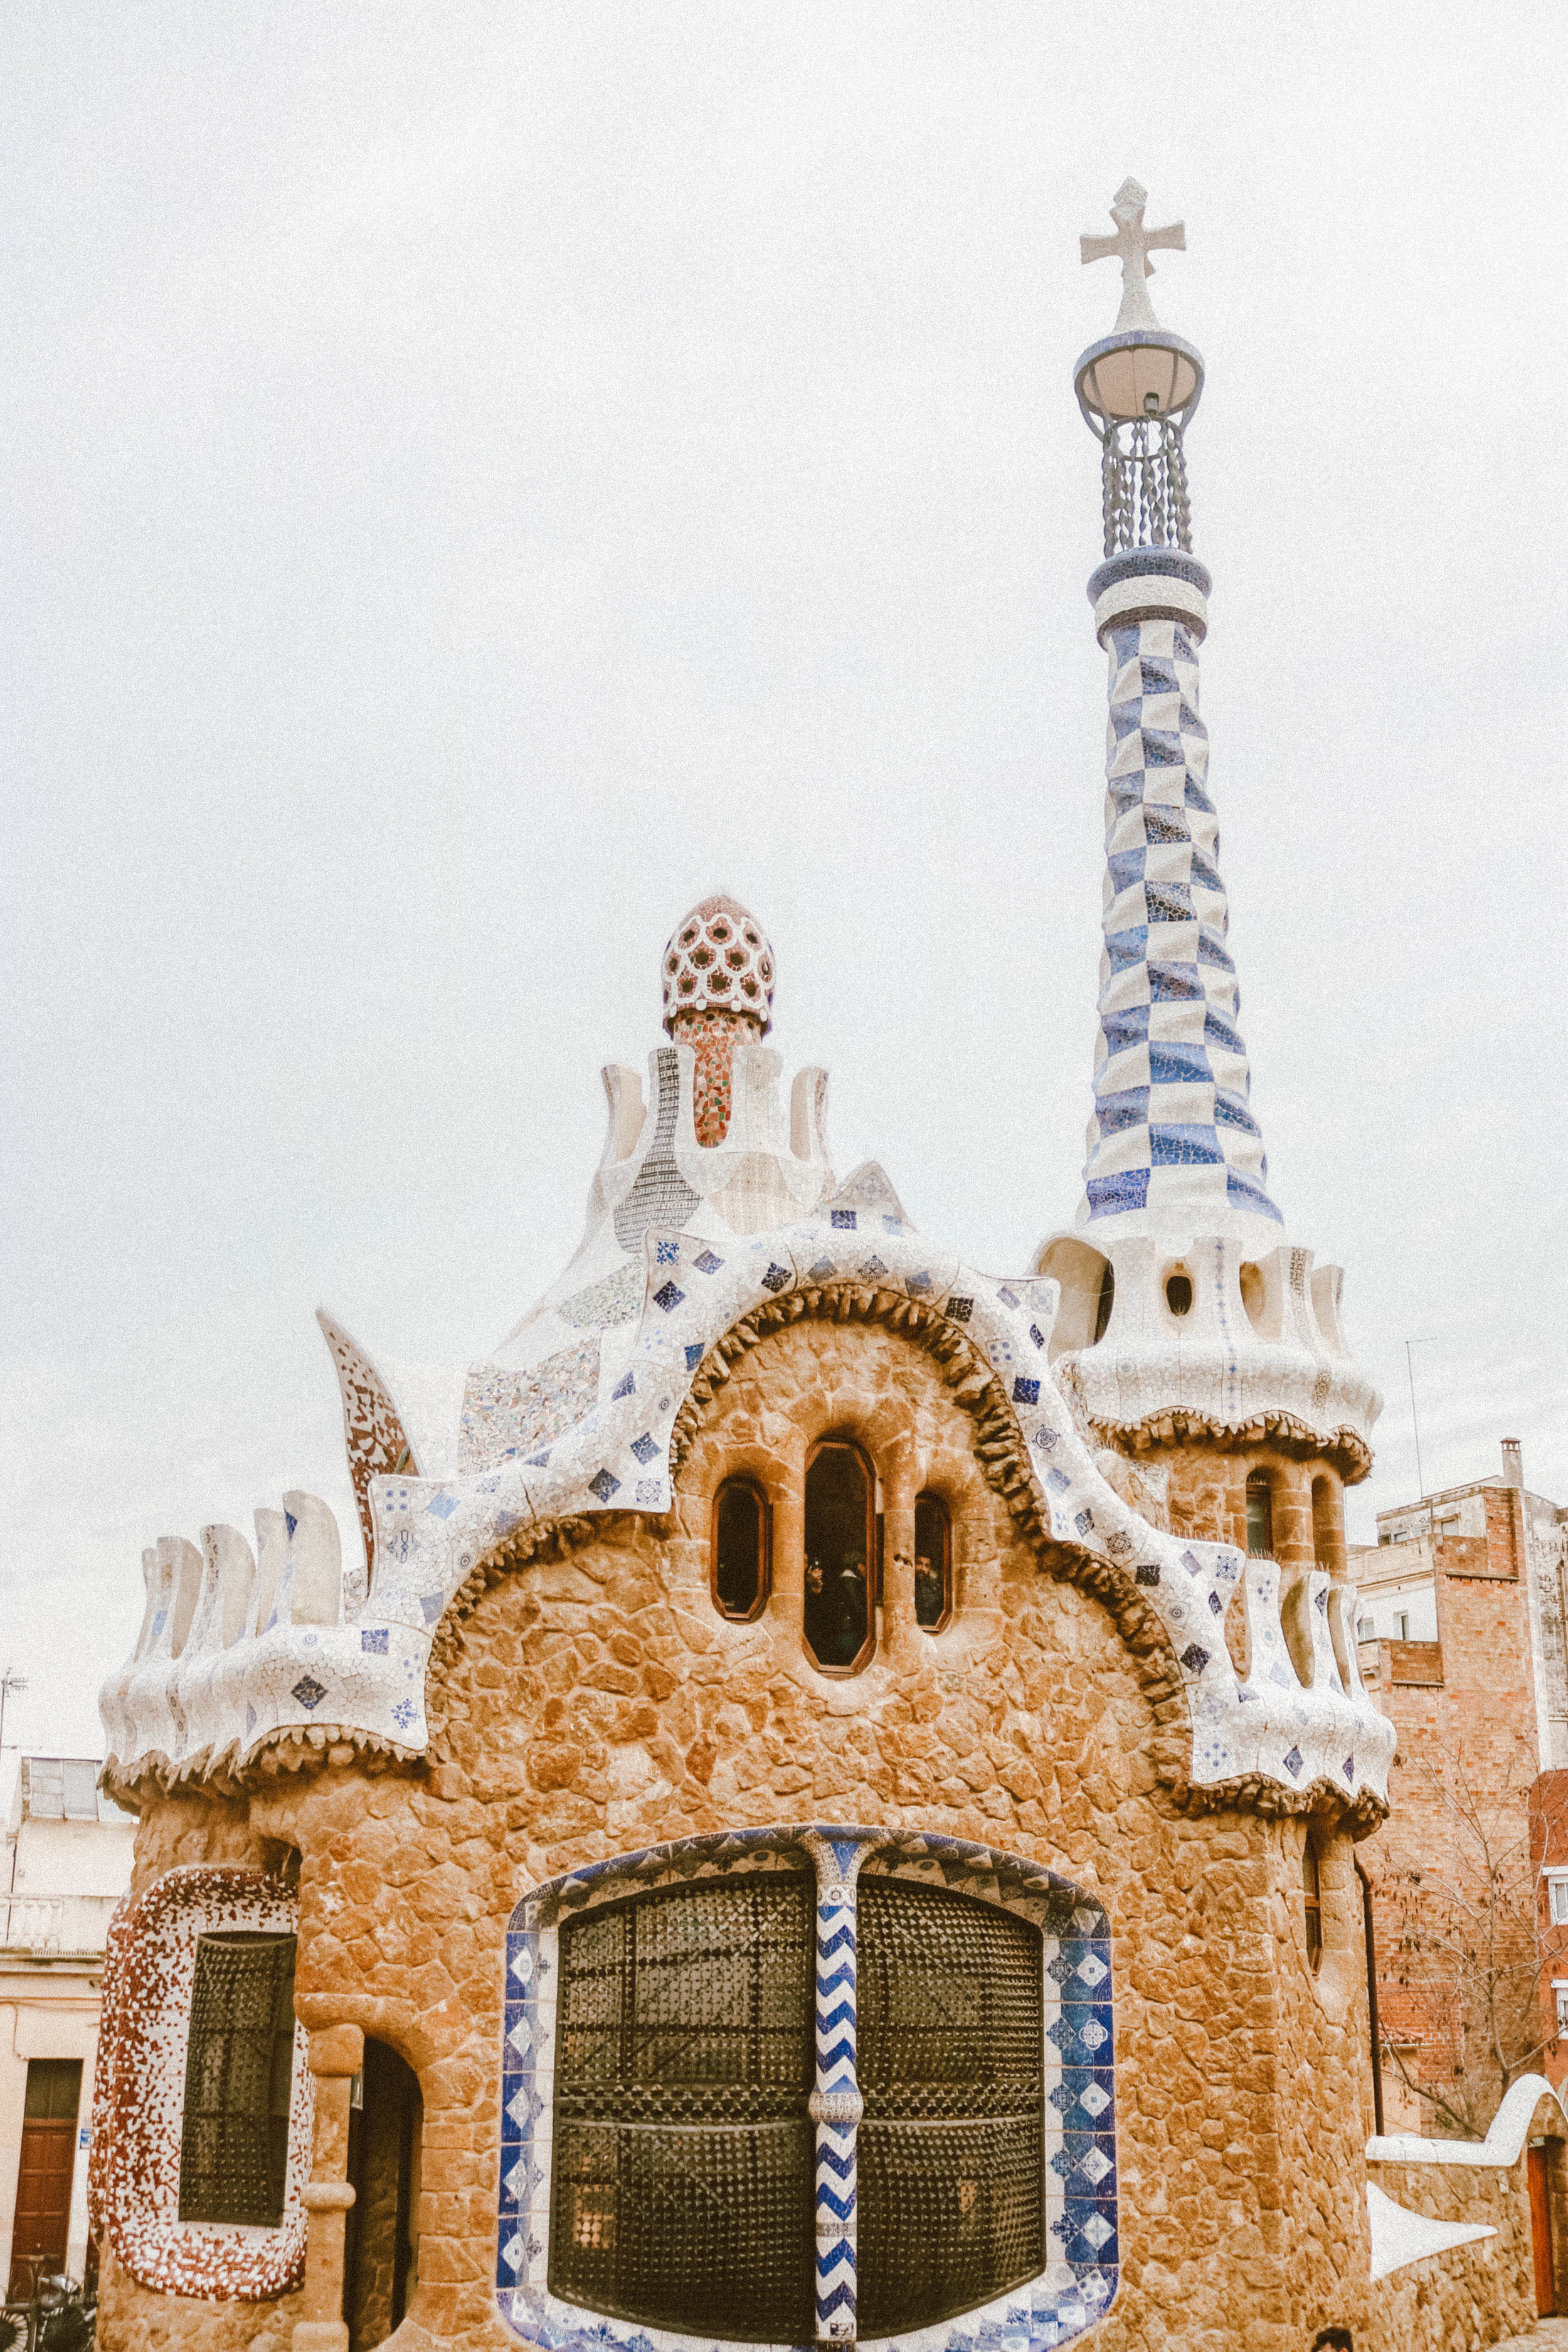  Visiting The Park Guell and Sagrada Familia | SaltWaterVibes